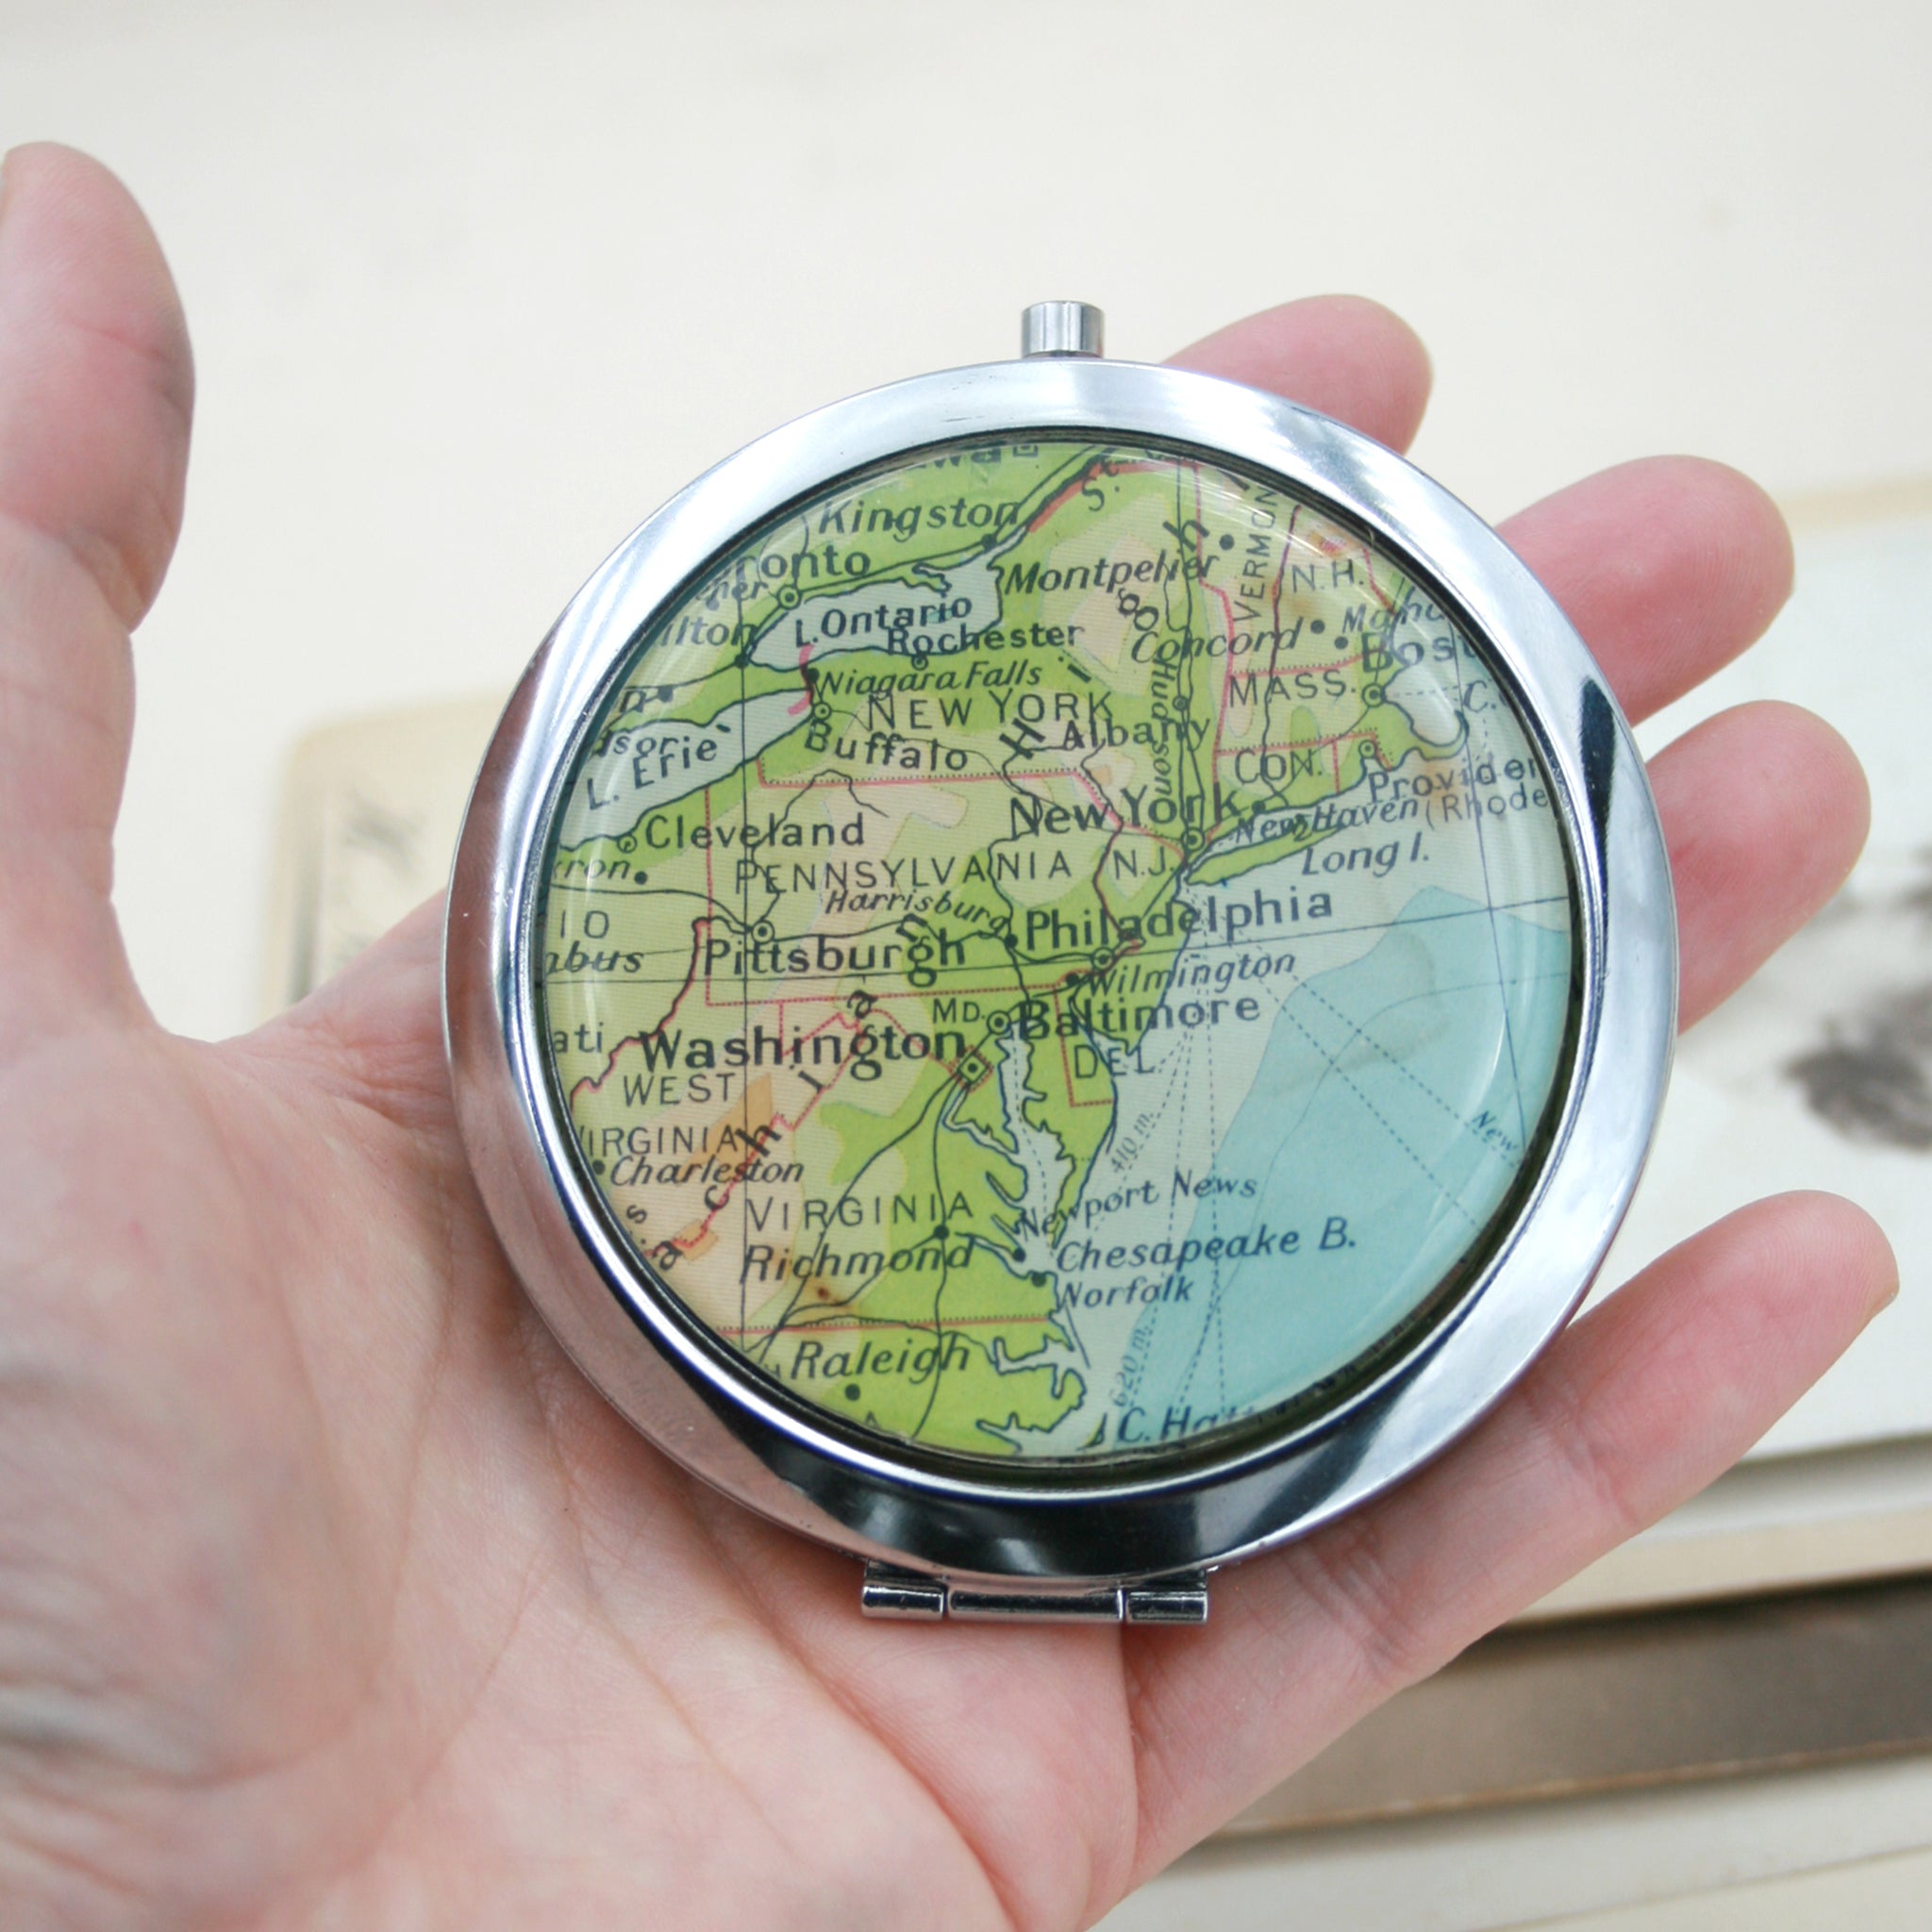 Hold in hand Personalised Compact Mirror in silver color featuring map of New York